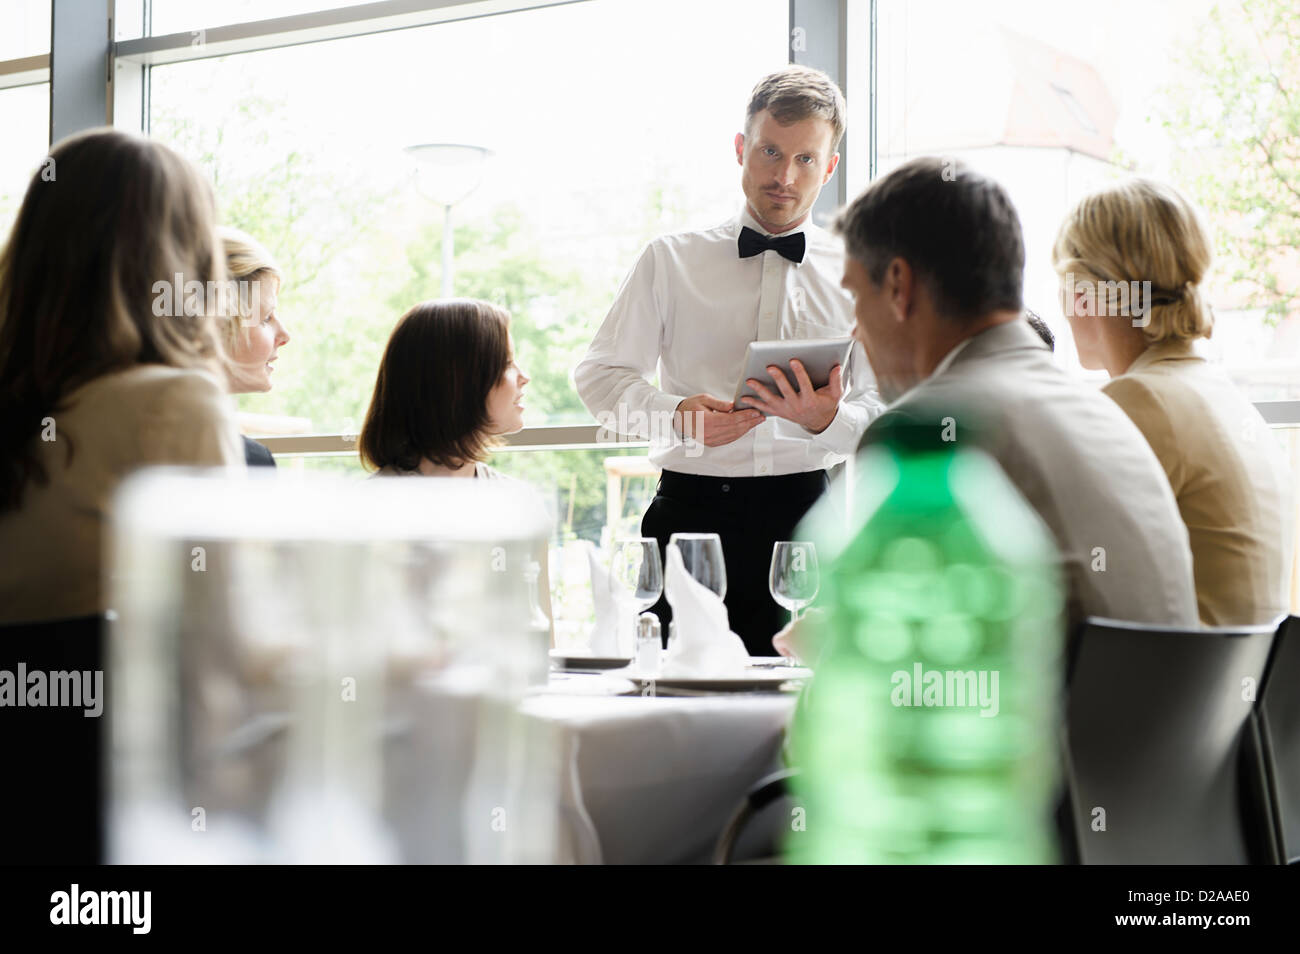 Waiter taking order with tablet computer Stock Photo